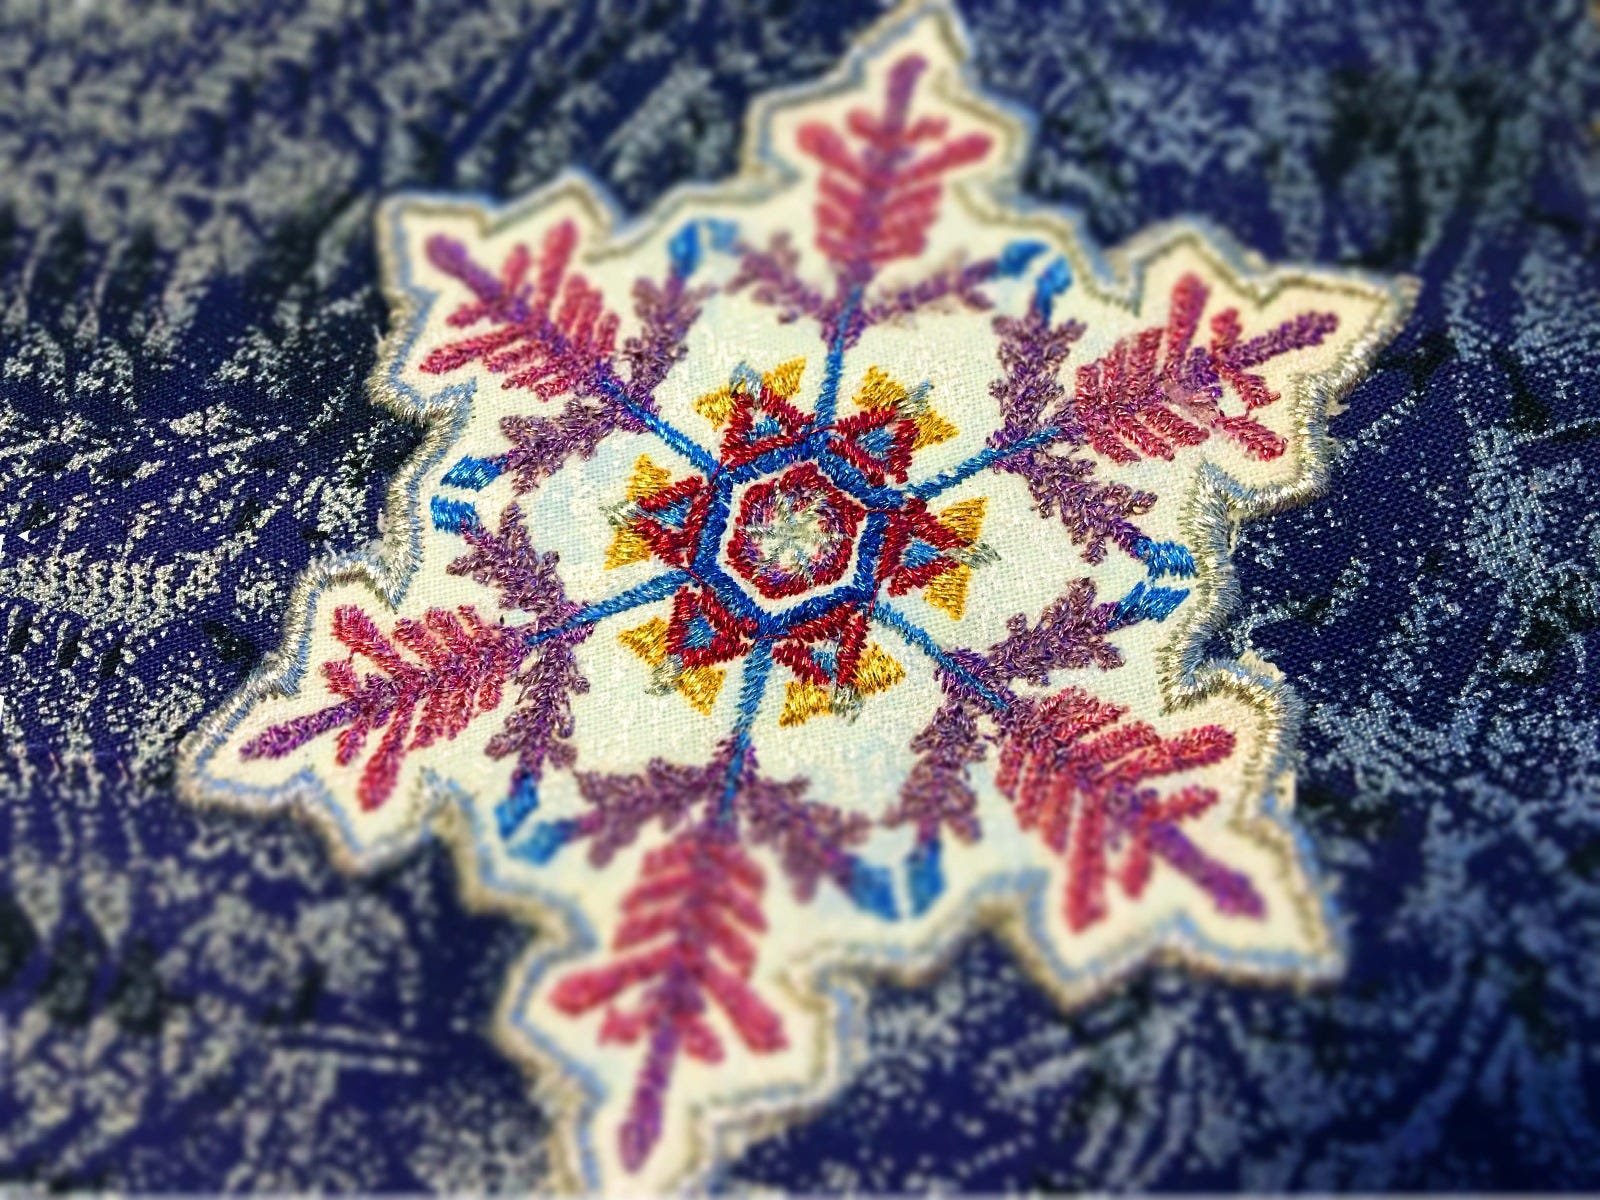 Finished snowflake design with Superior Metallics